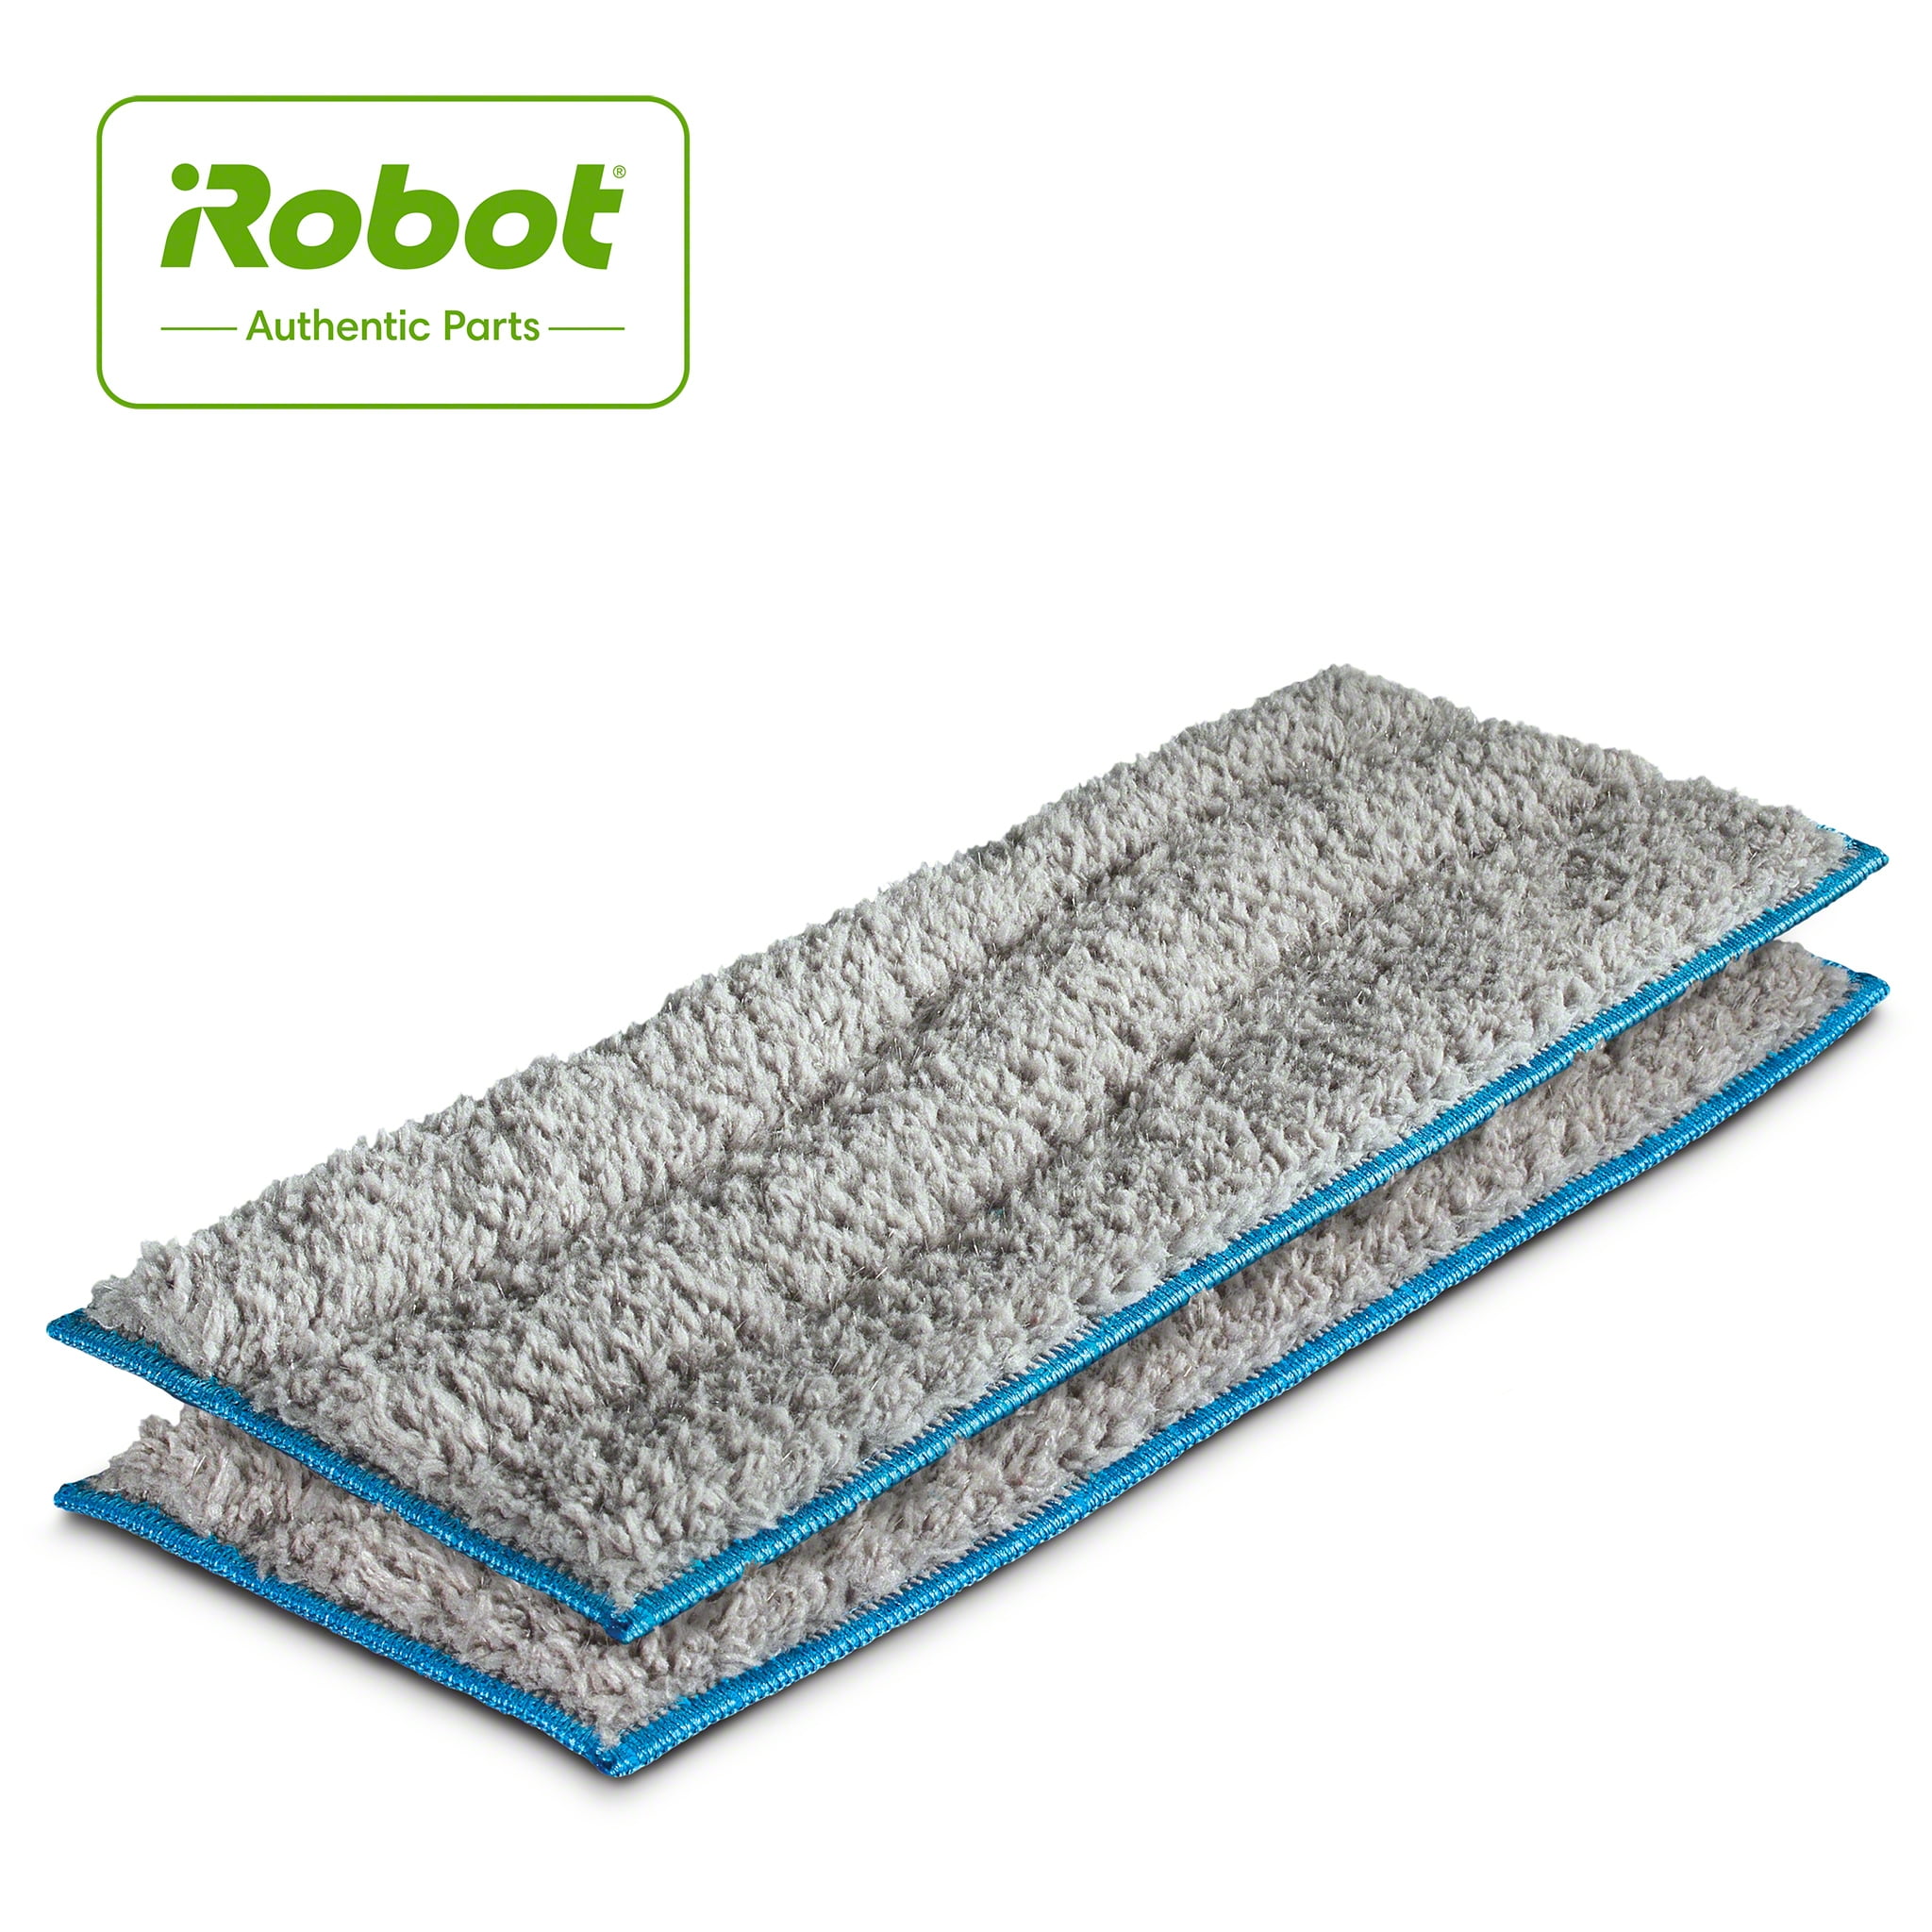 Replacement Washable Wet Dry Mopping Pads for iRobot Braava Jet 240 Cleaner" 